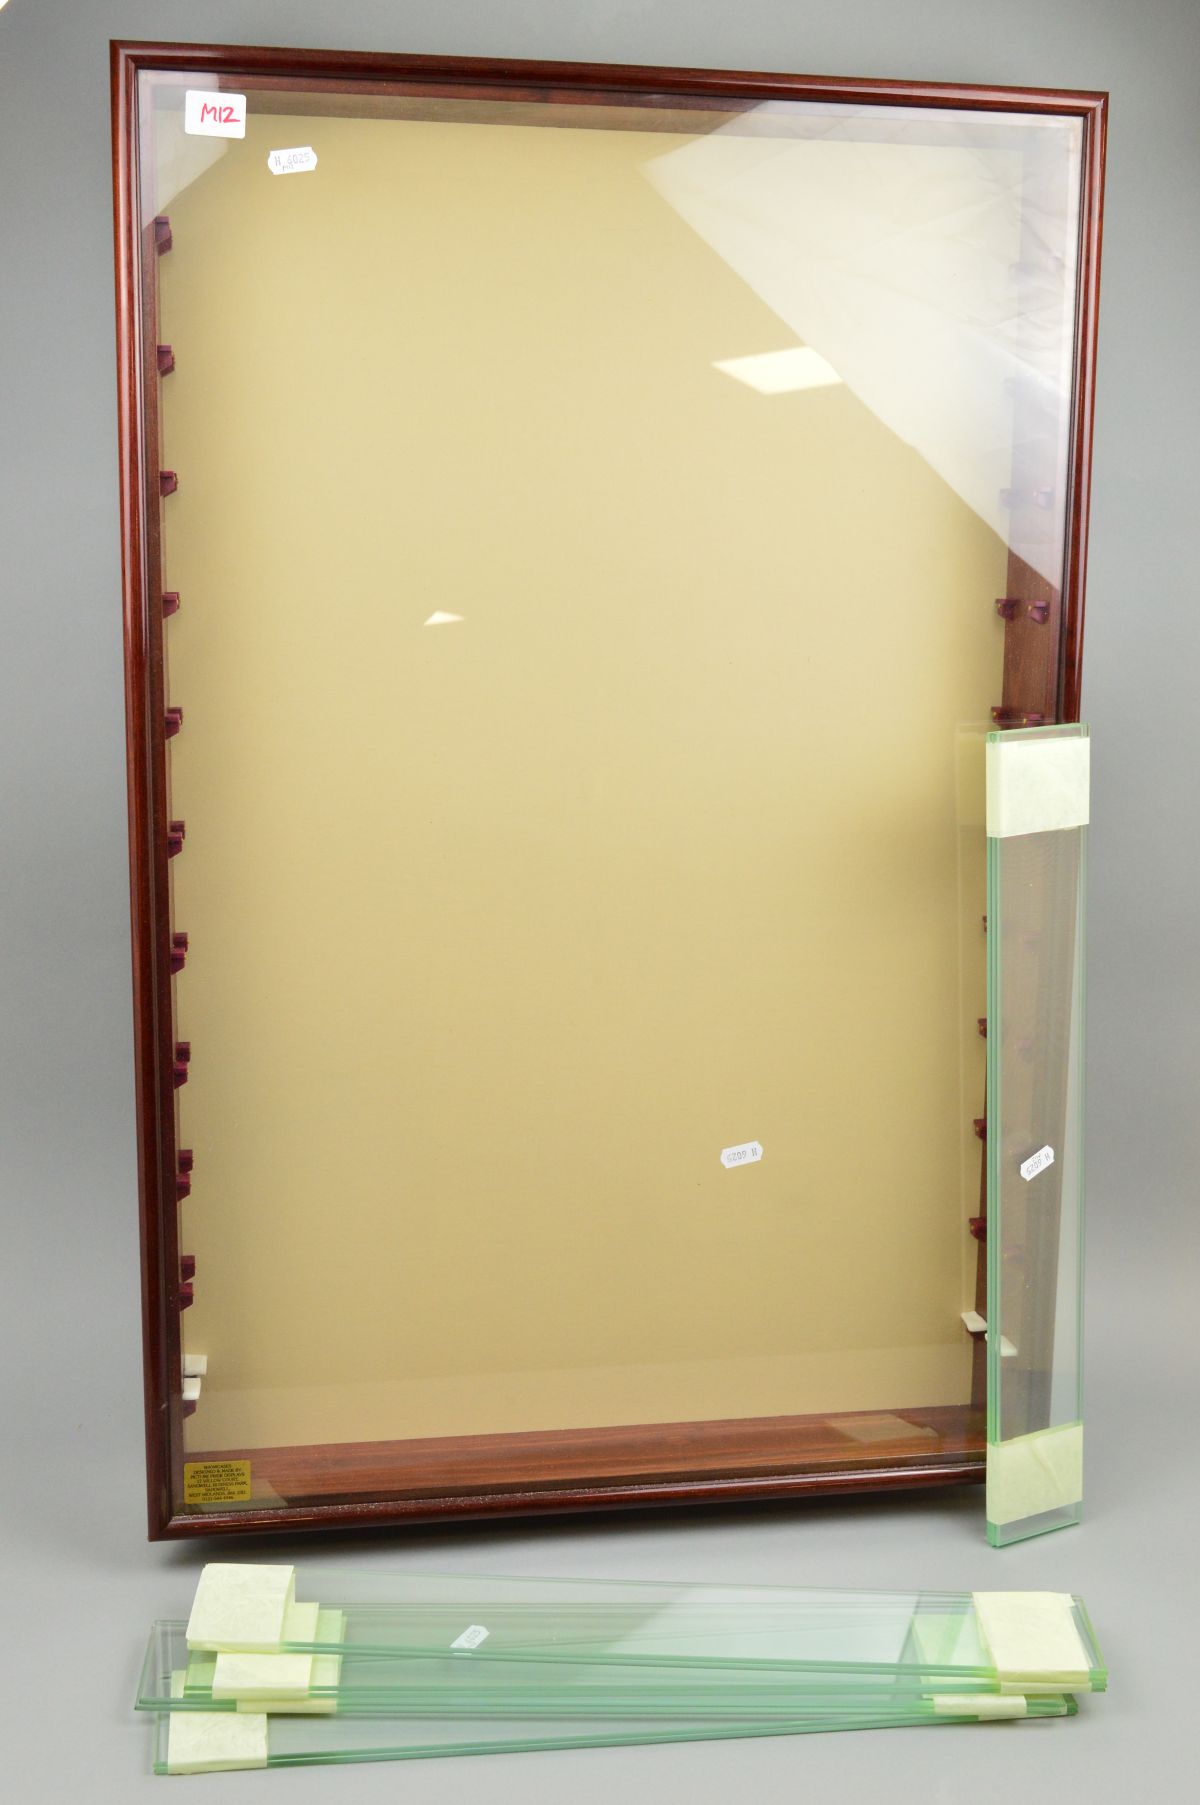 A GLASS FRONTED WALL MOUNTED WOODEN DISPLAY CABINET, approximate size 84cm high x 55cm wide x 9cm